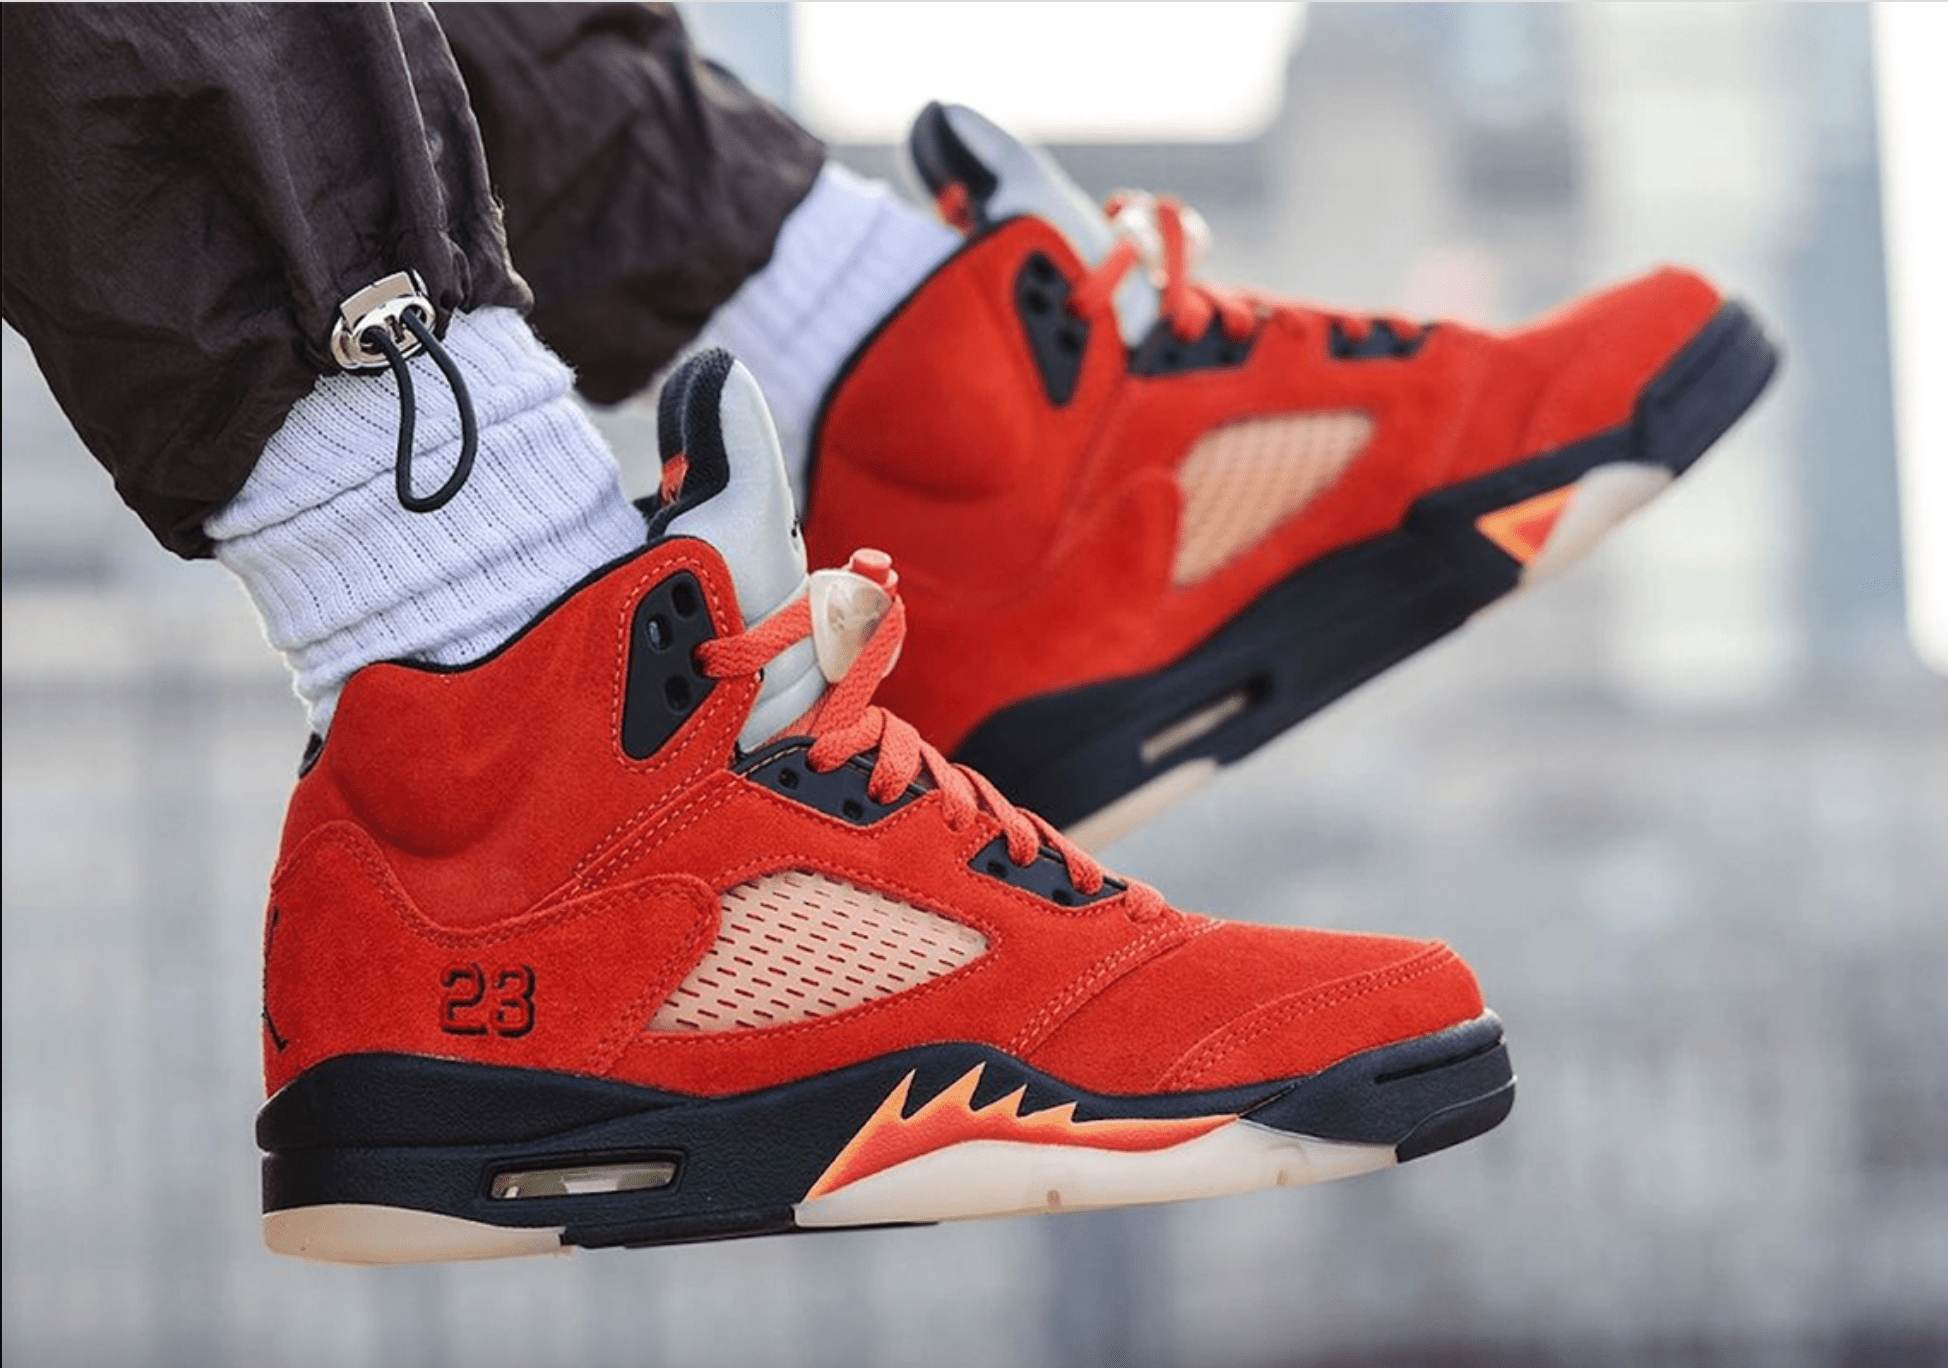 A pair of feet wearing red sneakers with the number 23 on the side. - Air Jordan 5